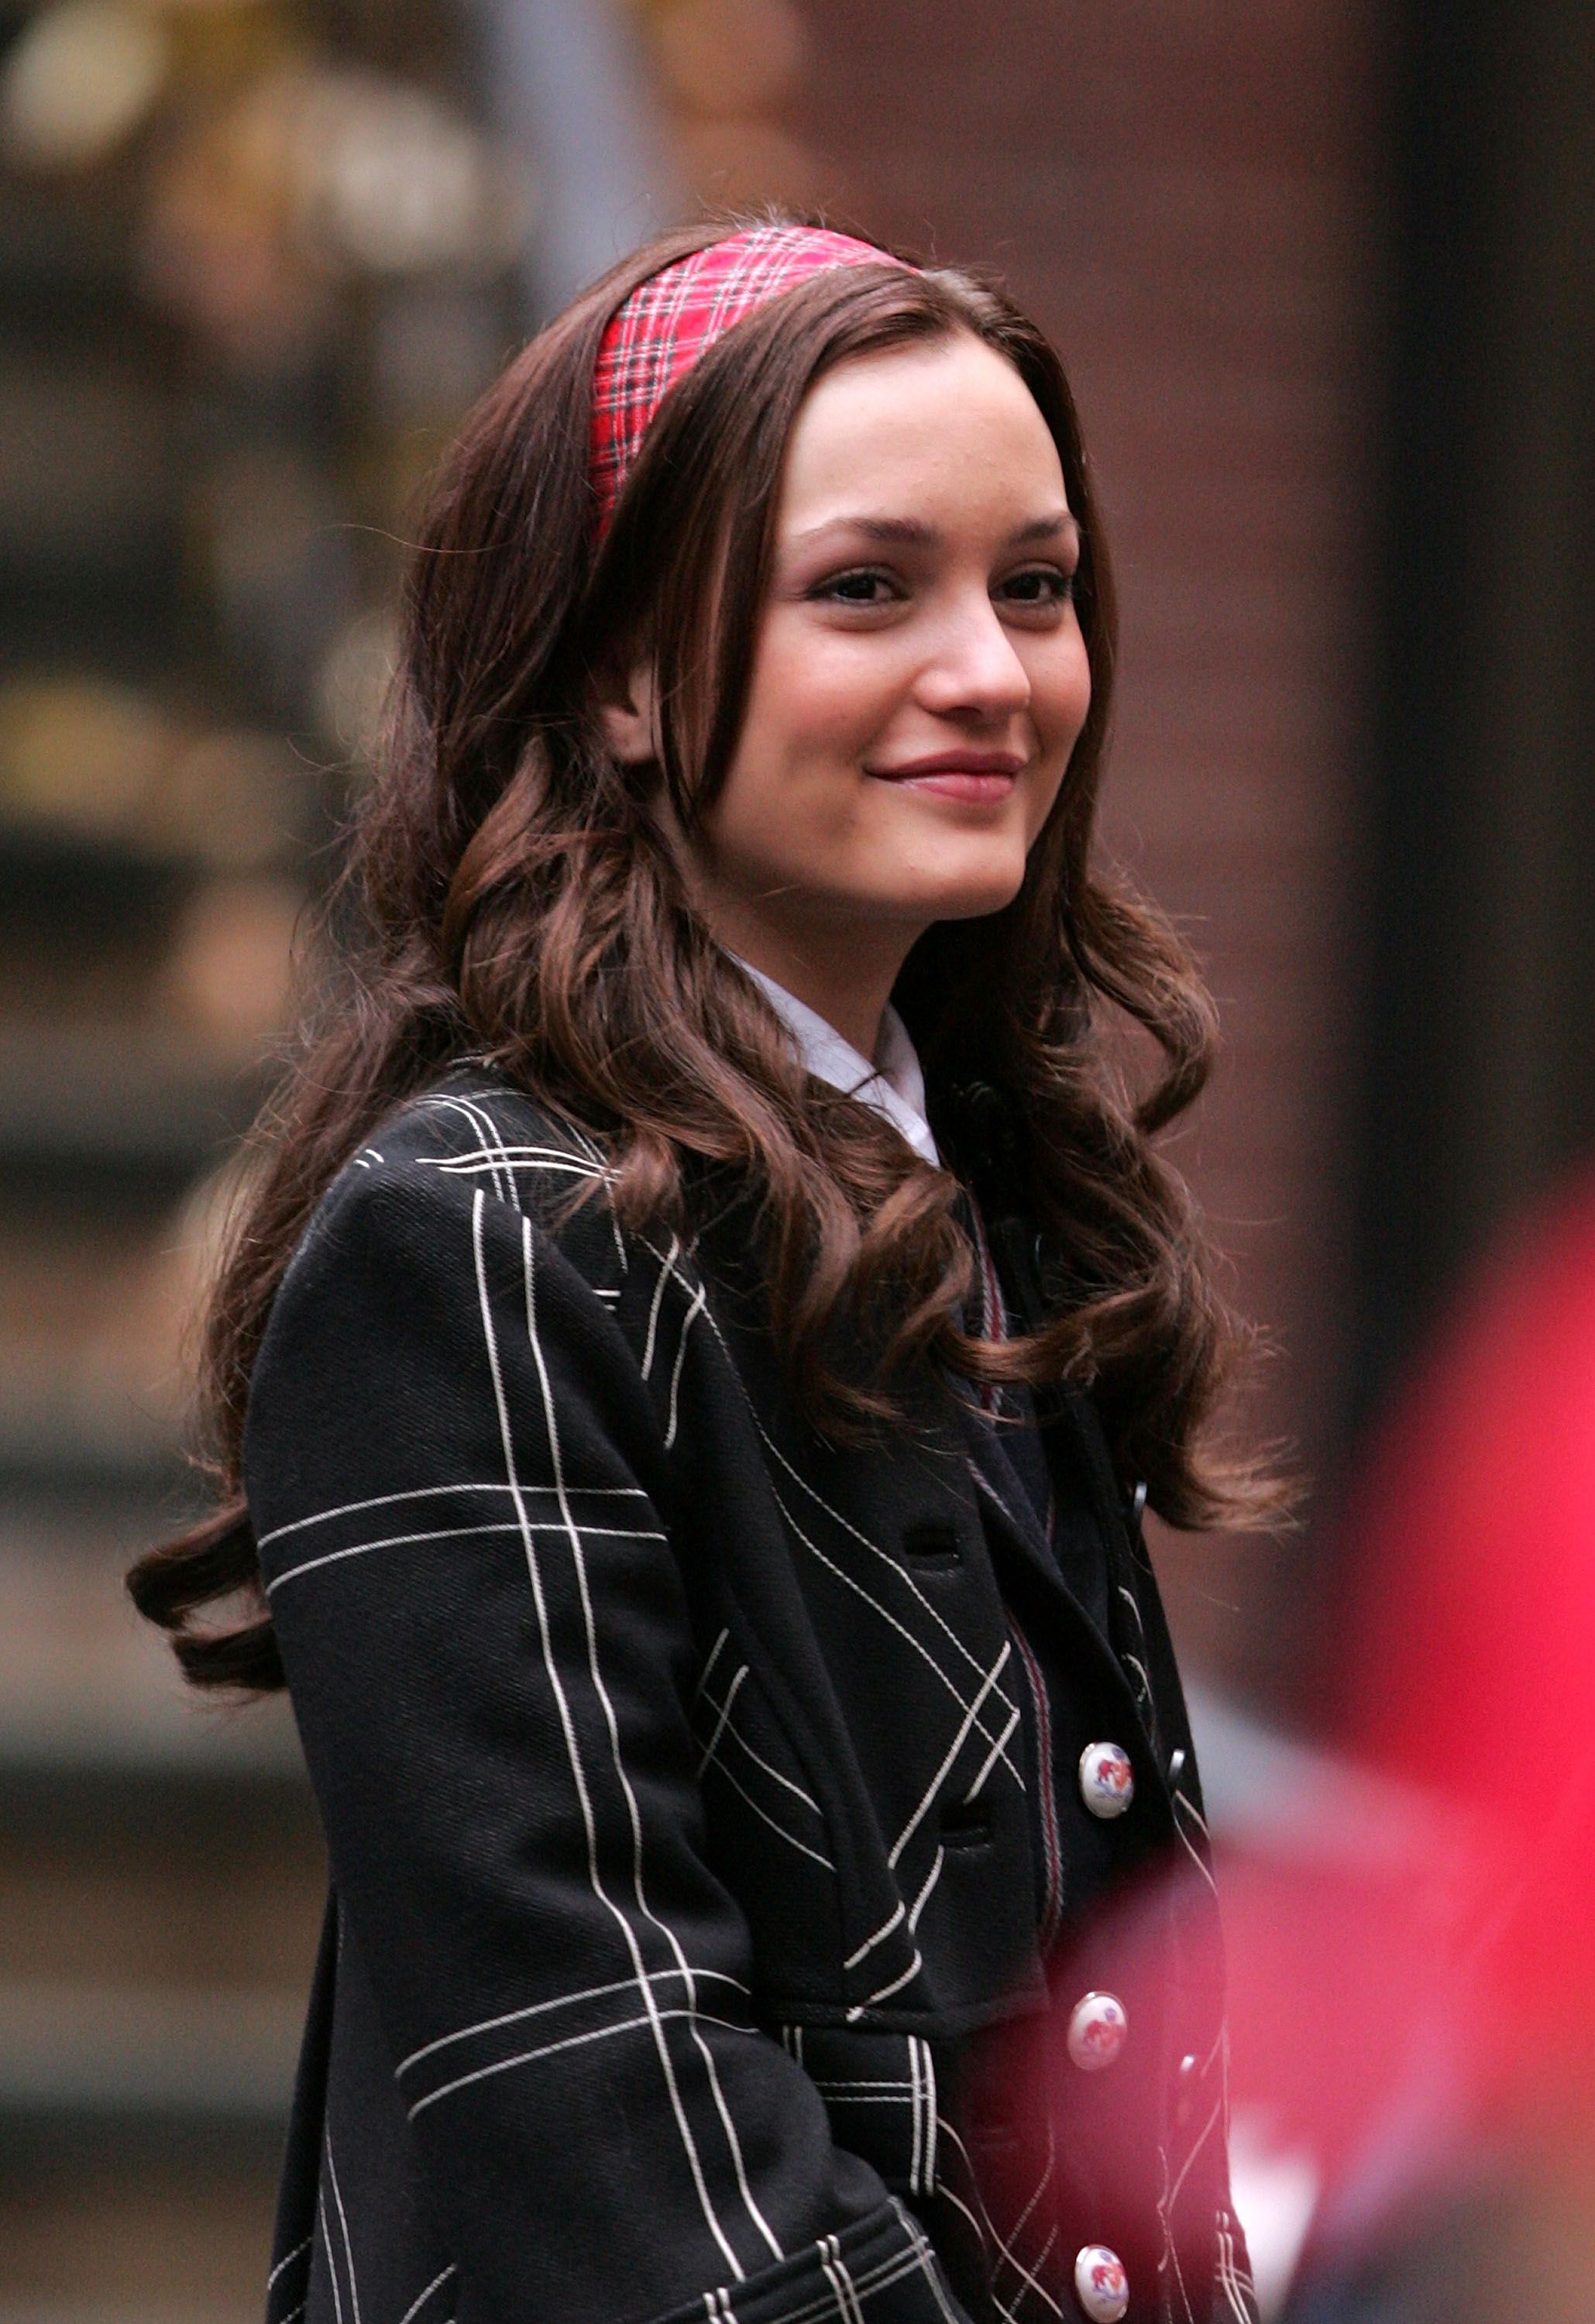 These Are All Of Your Favorite Gossip Girl Stars Then And Now